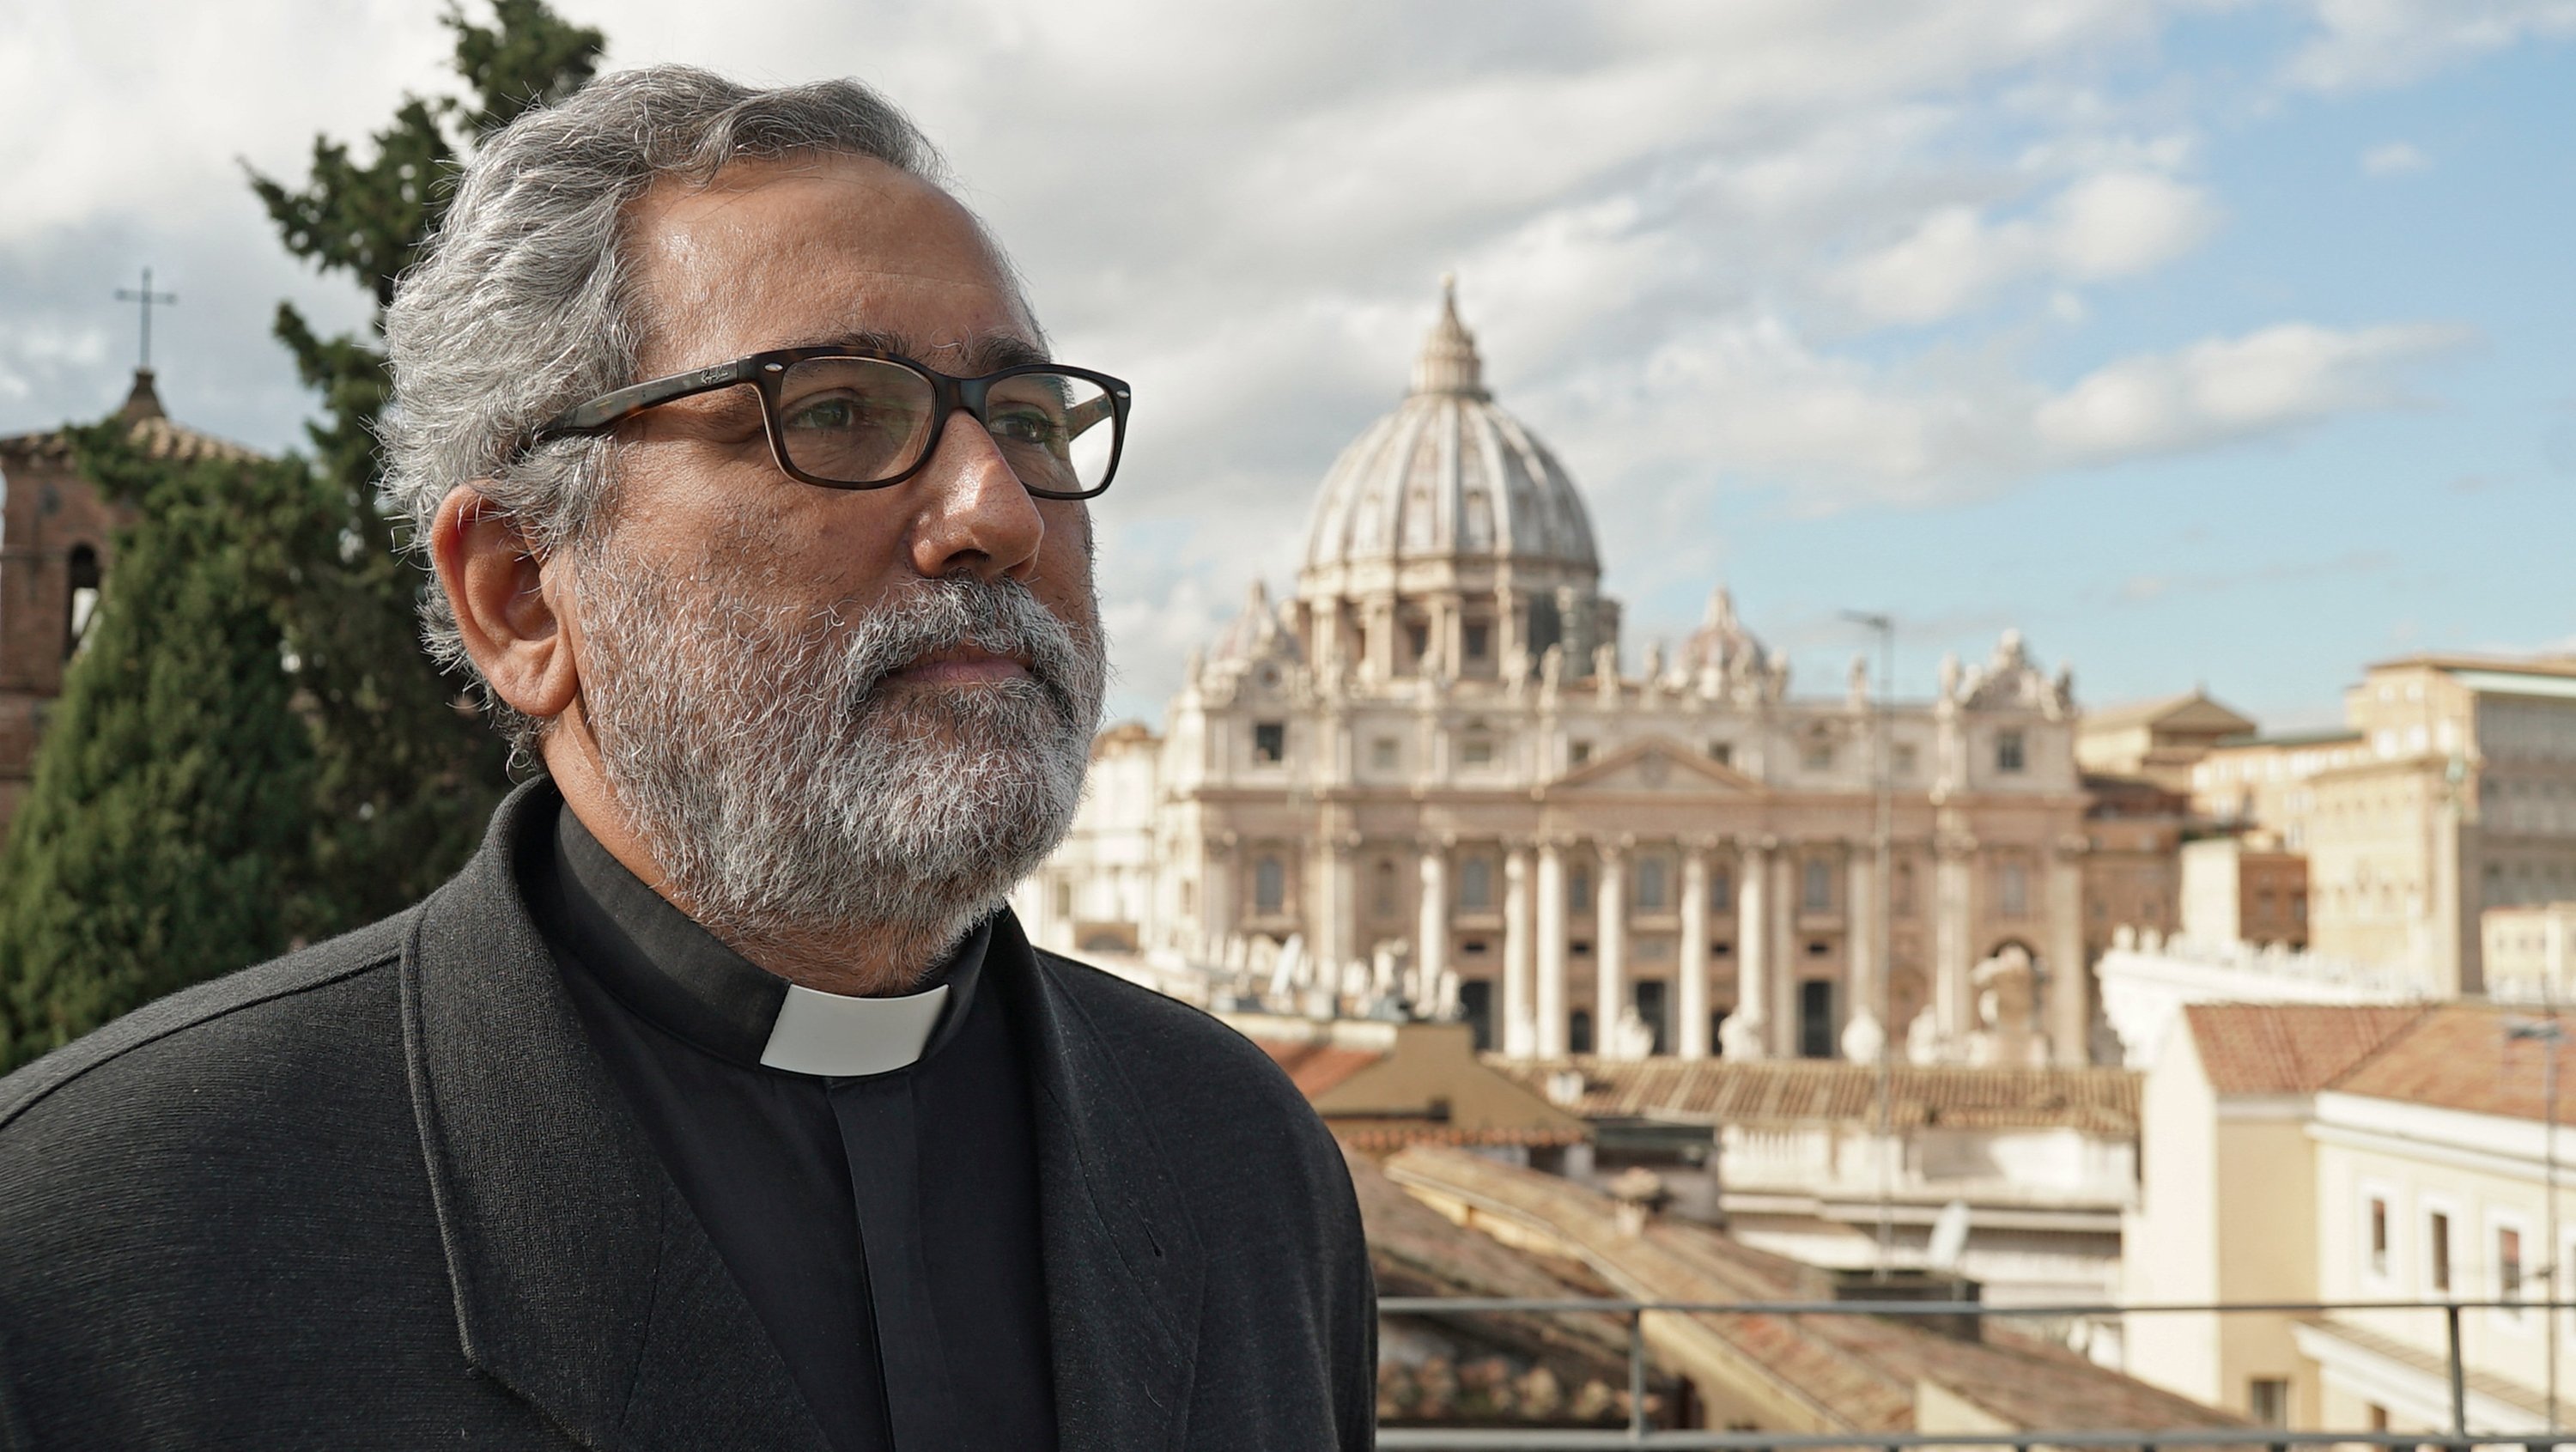 Jesuit Father Juan Antonio Guerrero Alves, prefect of the Vatican Secretariat for the Economy, is pictured near the Vatican in an undated photo. (CNS photo/courtesy Society of Jesus)